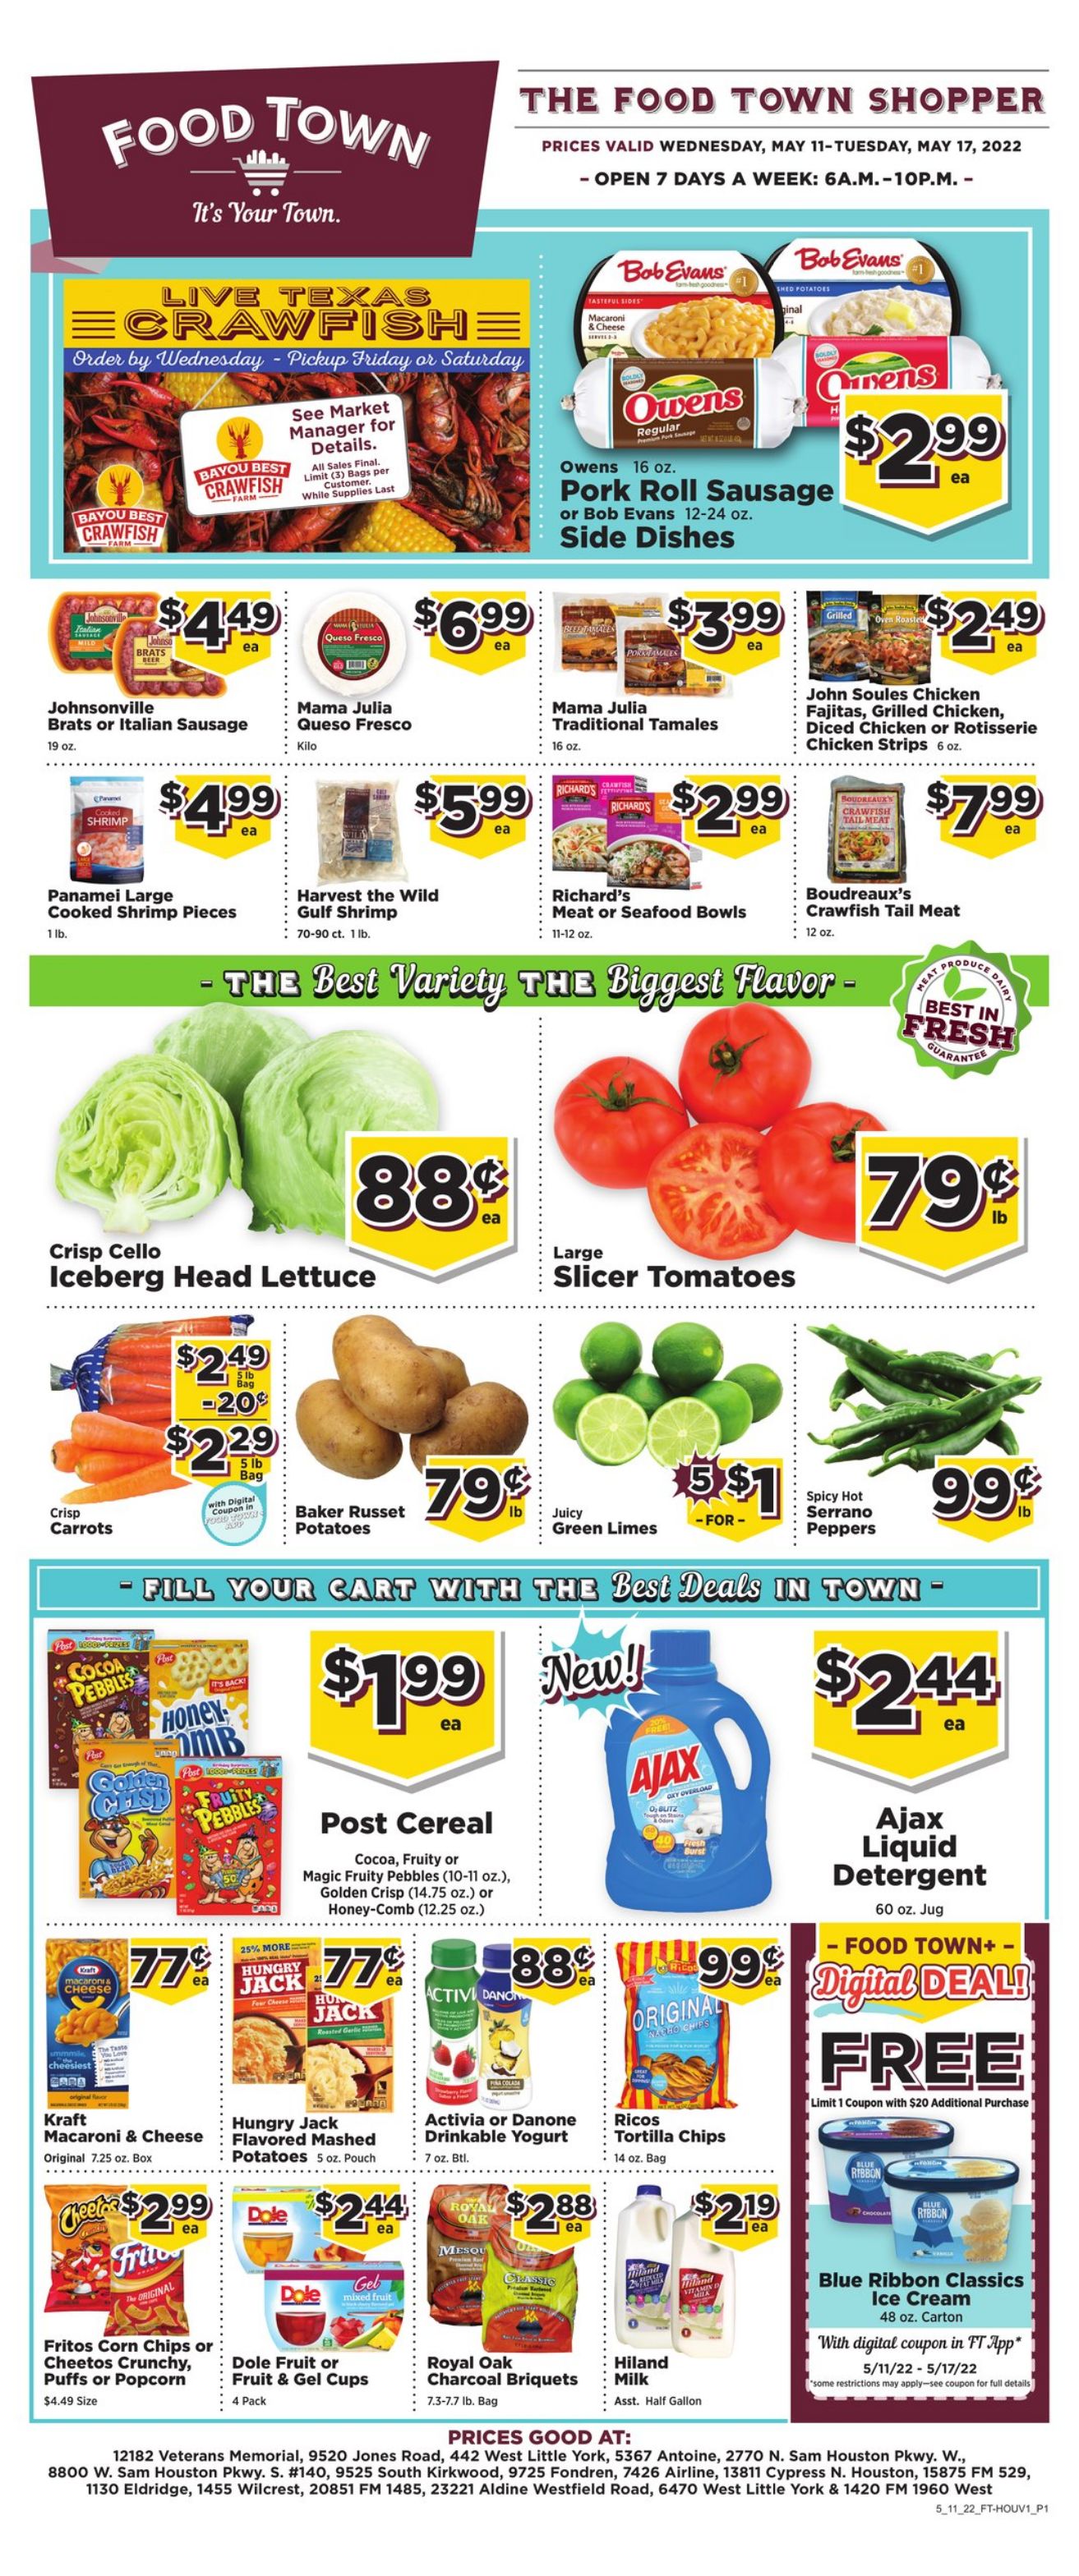 Your Food Town Promotional weekly ads